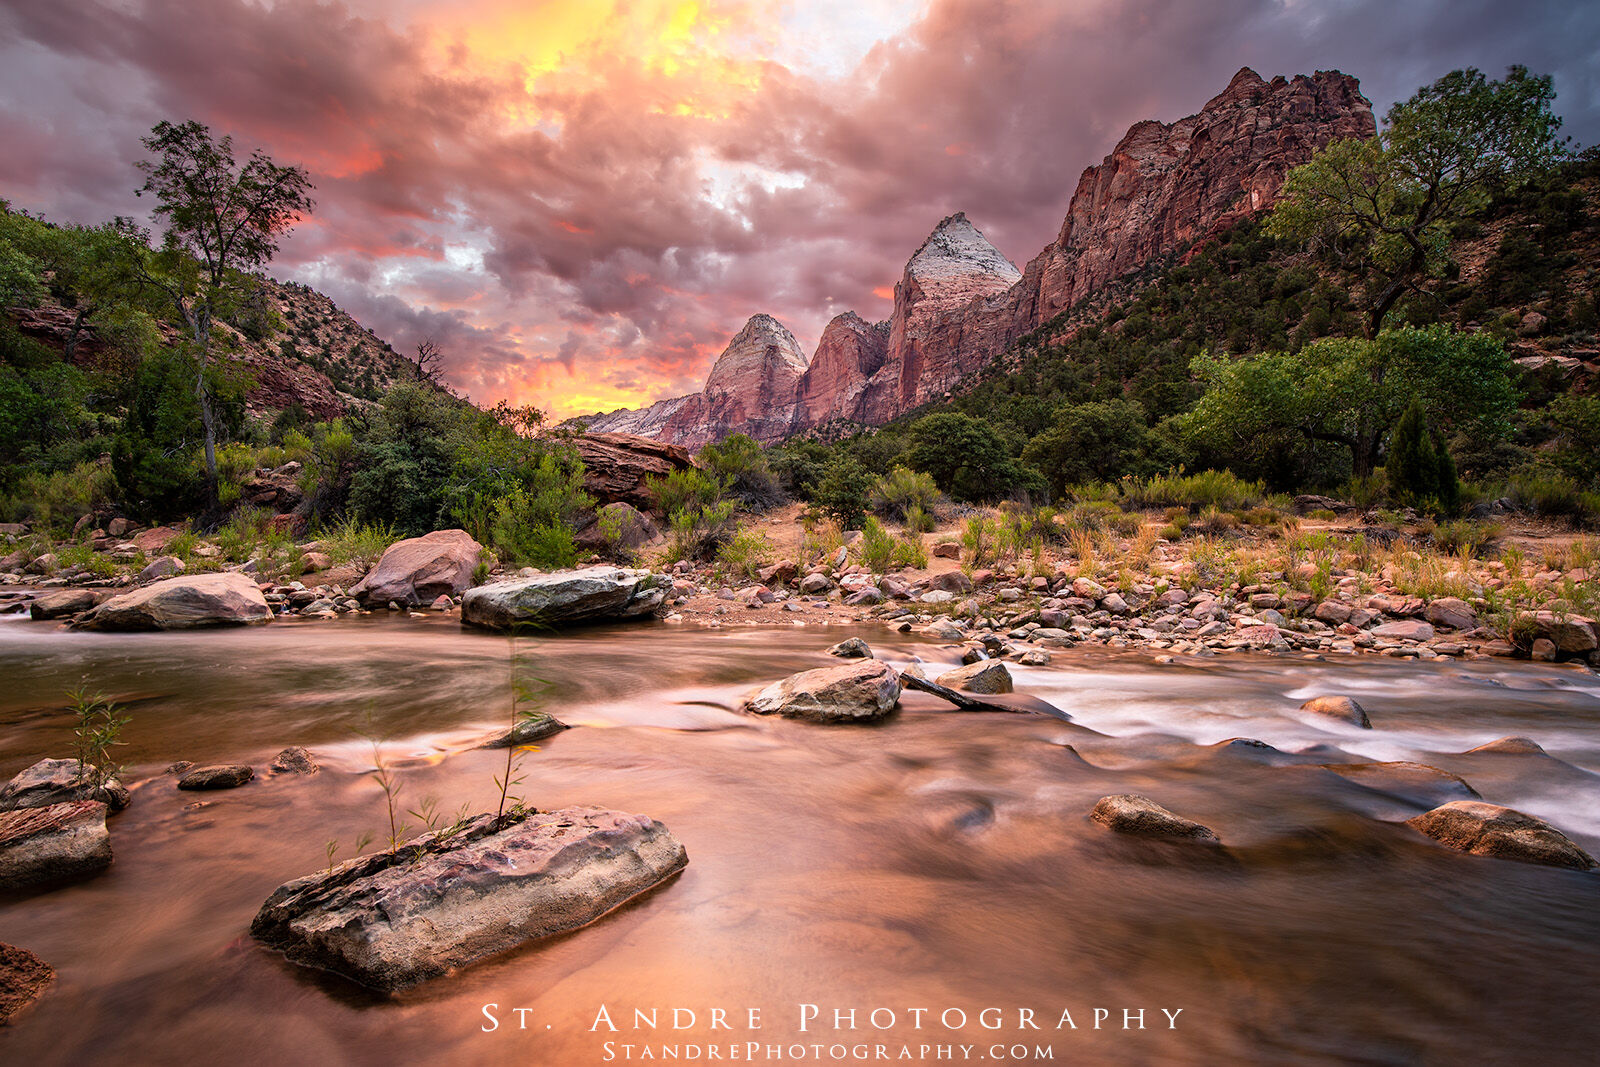 A series of peaks located in Zion National Park including Temple of the Sun, Two Brothers, and the East Temple. Peaks photographed with dramatic skies.